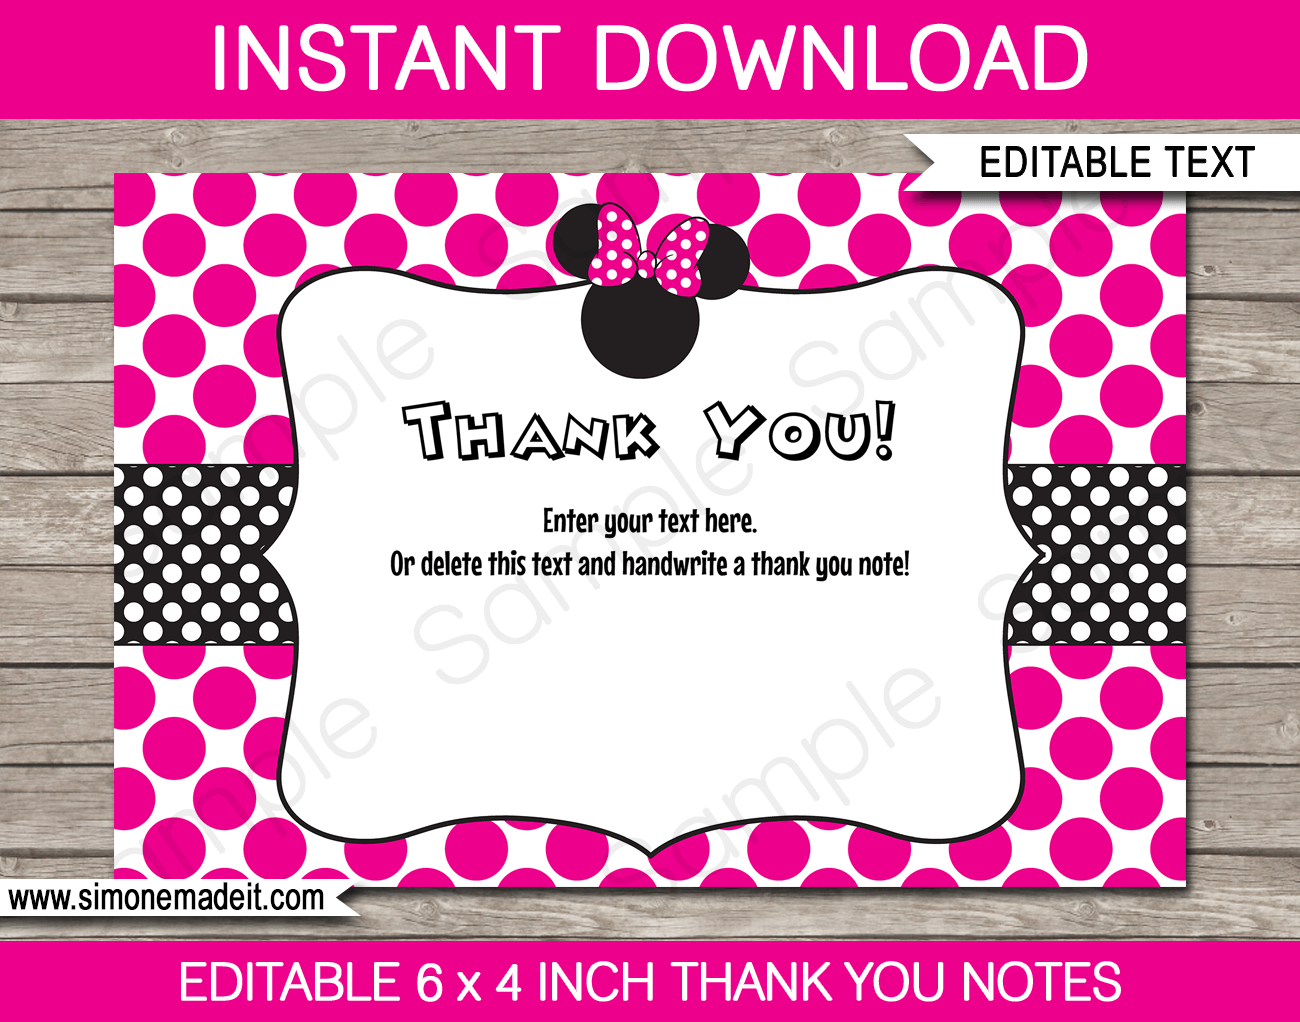 Pink Printable Minnie Mouse Thank You Cards Template - Birthday Party Theme - with Editable Text - Instant Download via simonemadeit.com